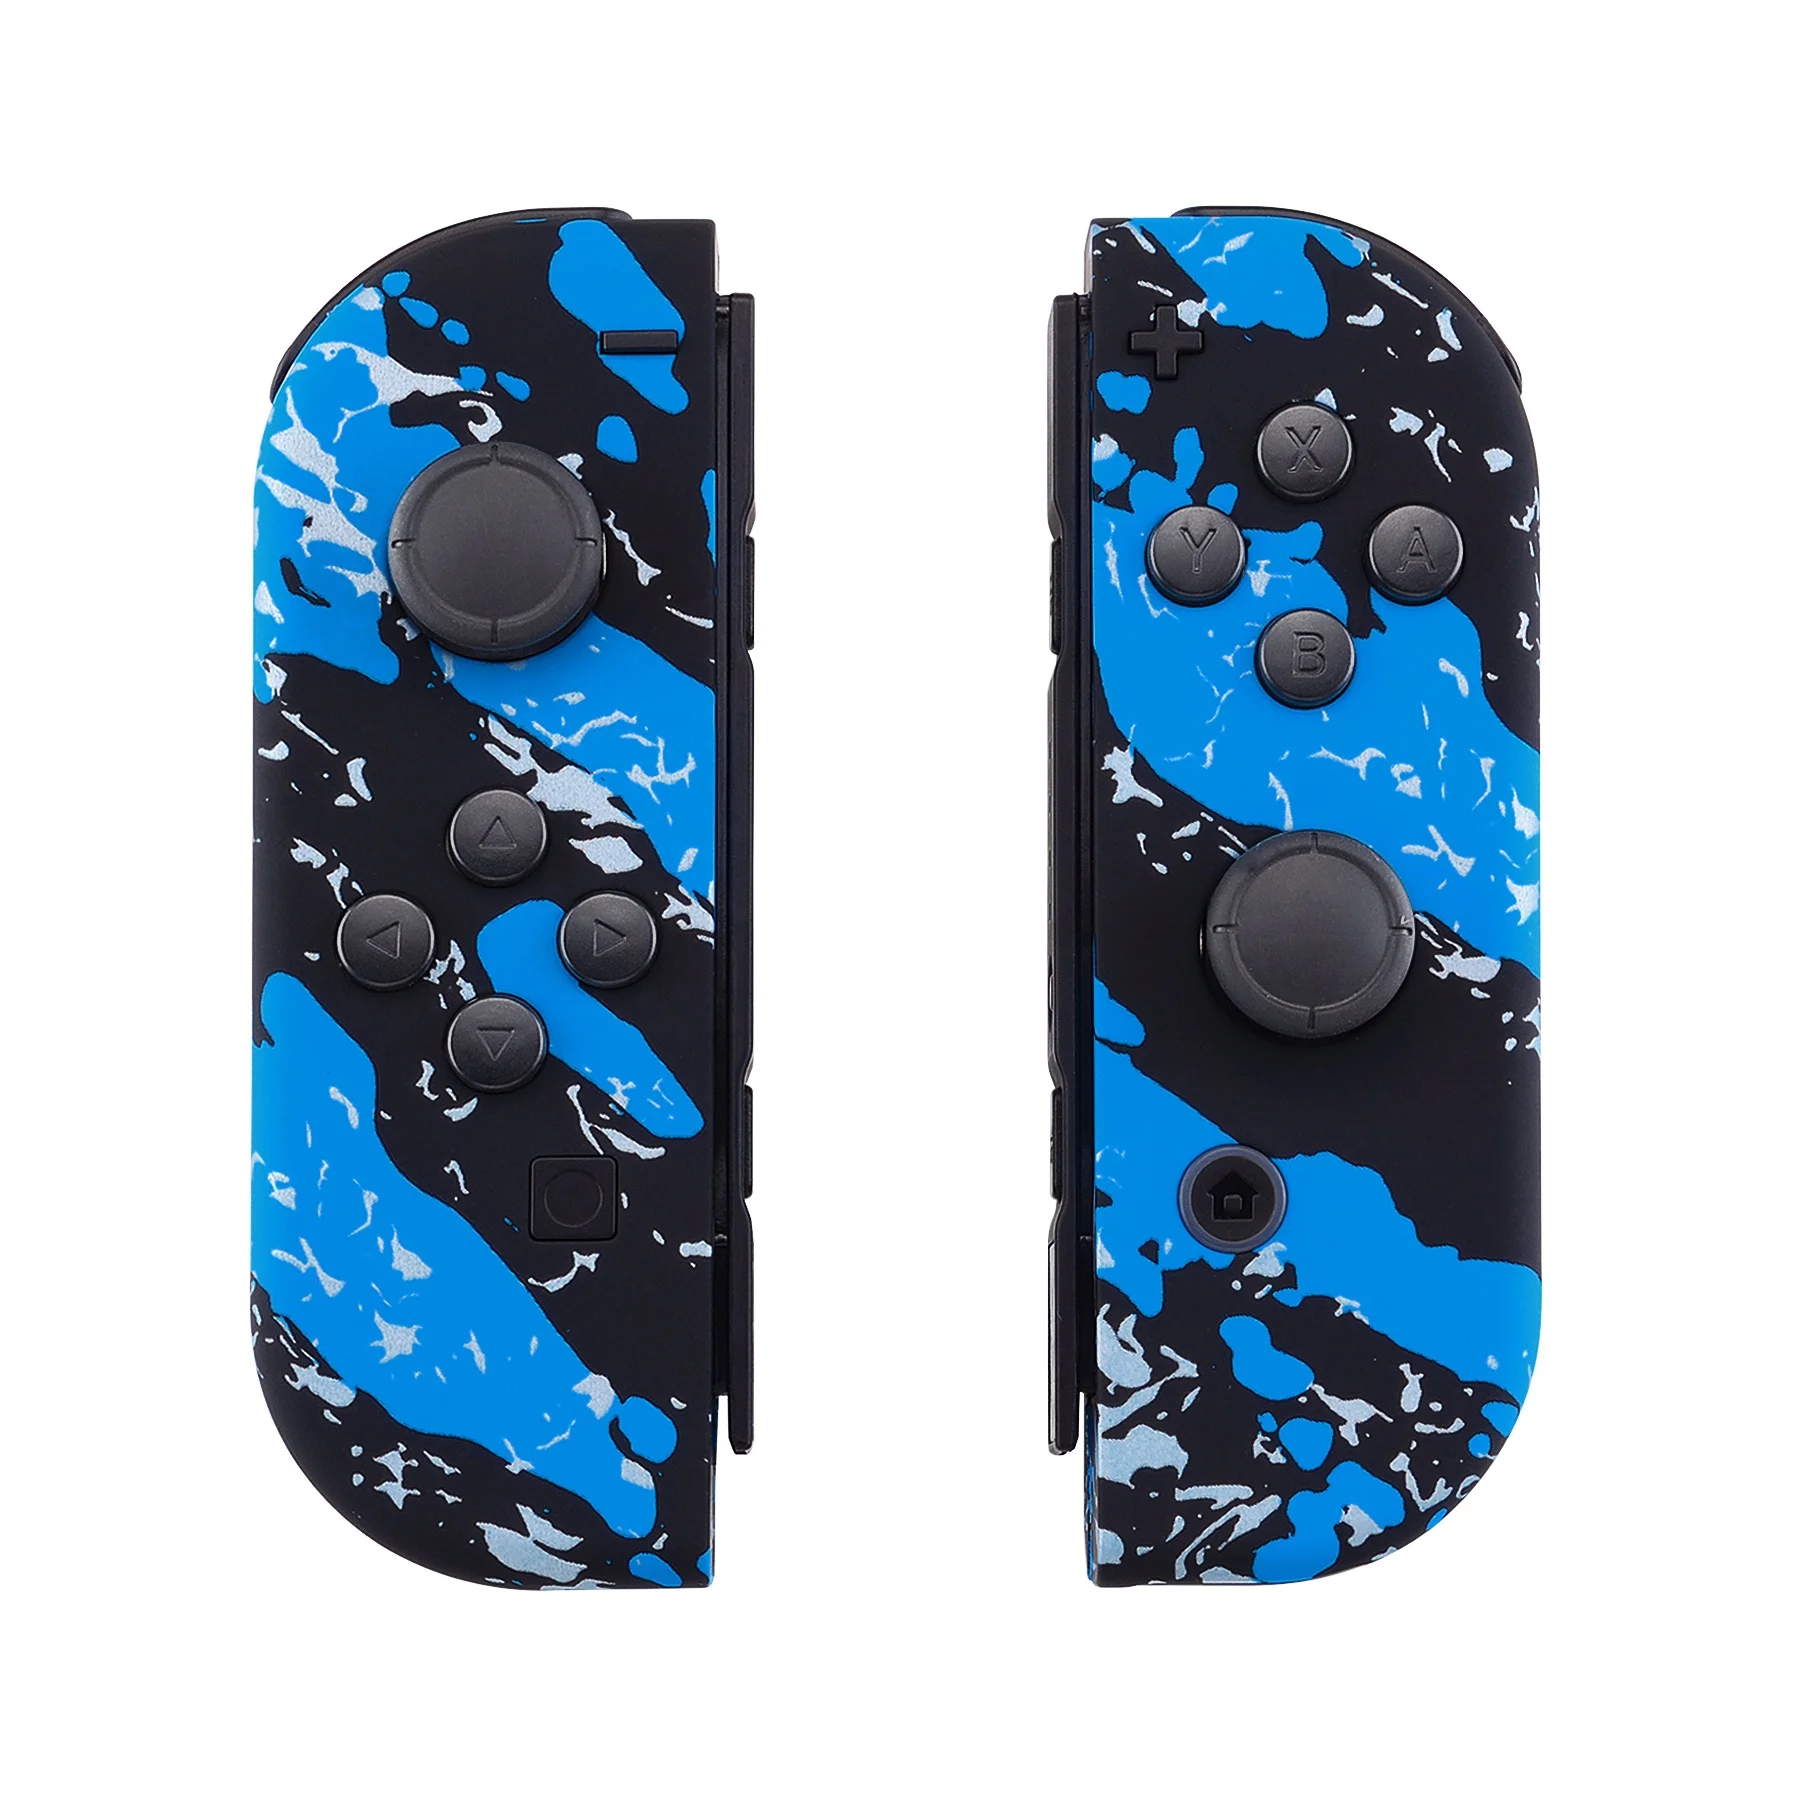 

Wholesale Replacement Switch Controller Housing Case Cover Shell For Joycon Nintendo Switch & OLED Controller Mod Accessories